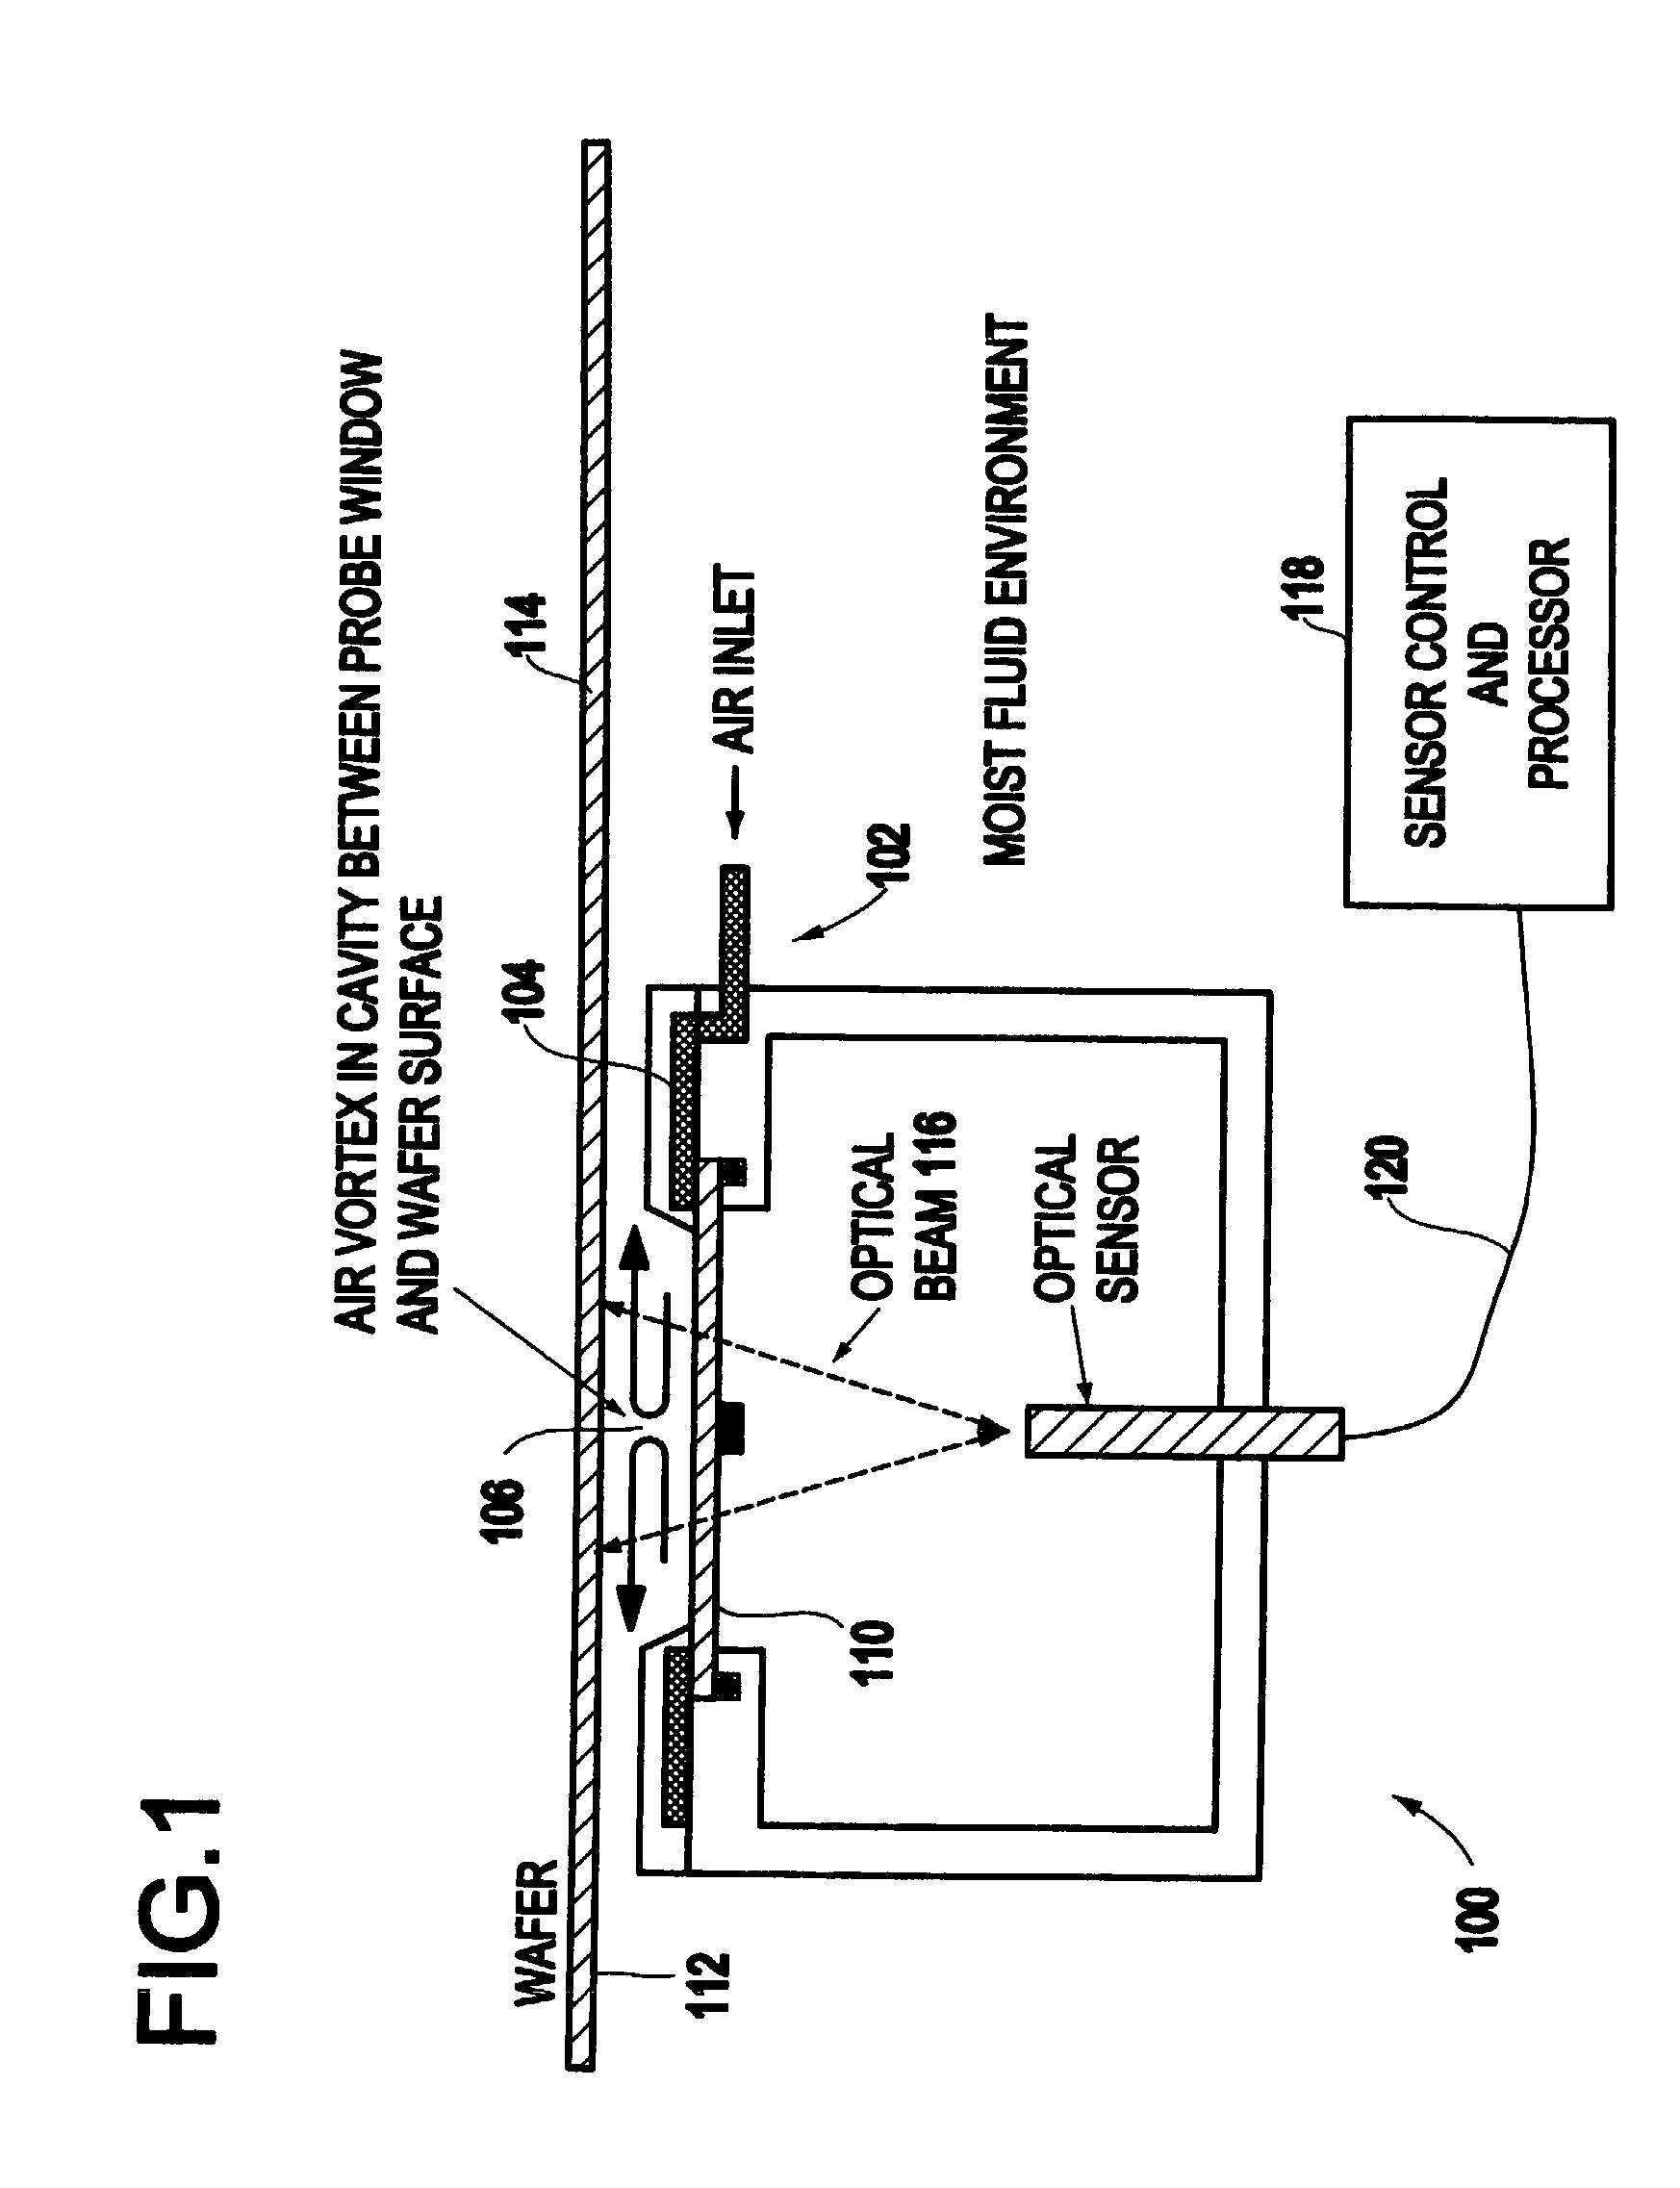 Method and apparatus for optical film measurements in a controlled environment